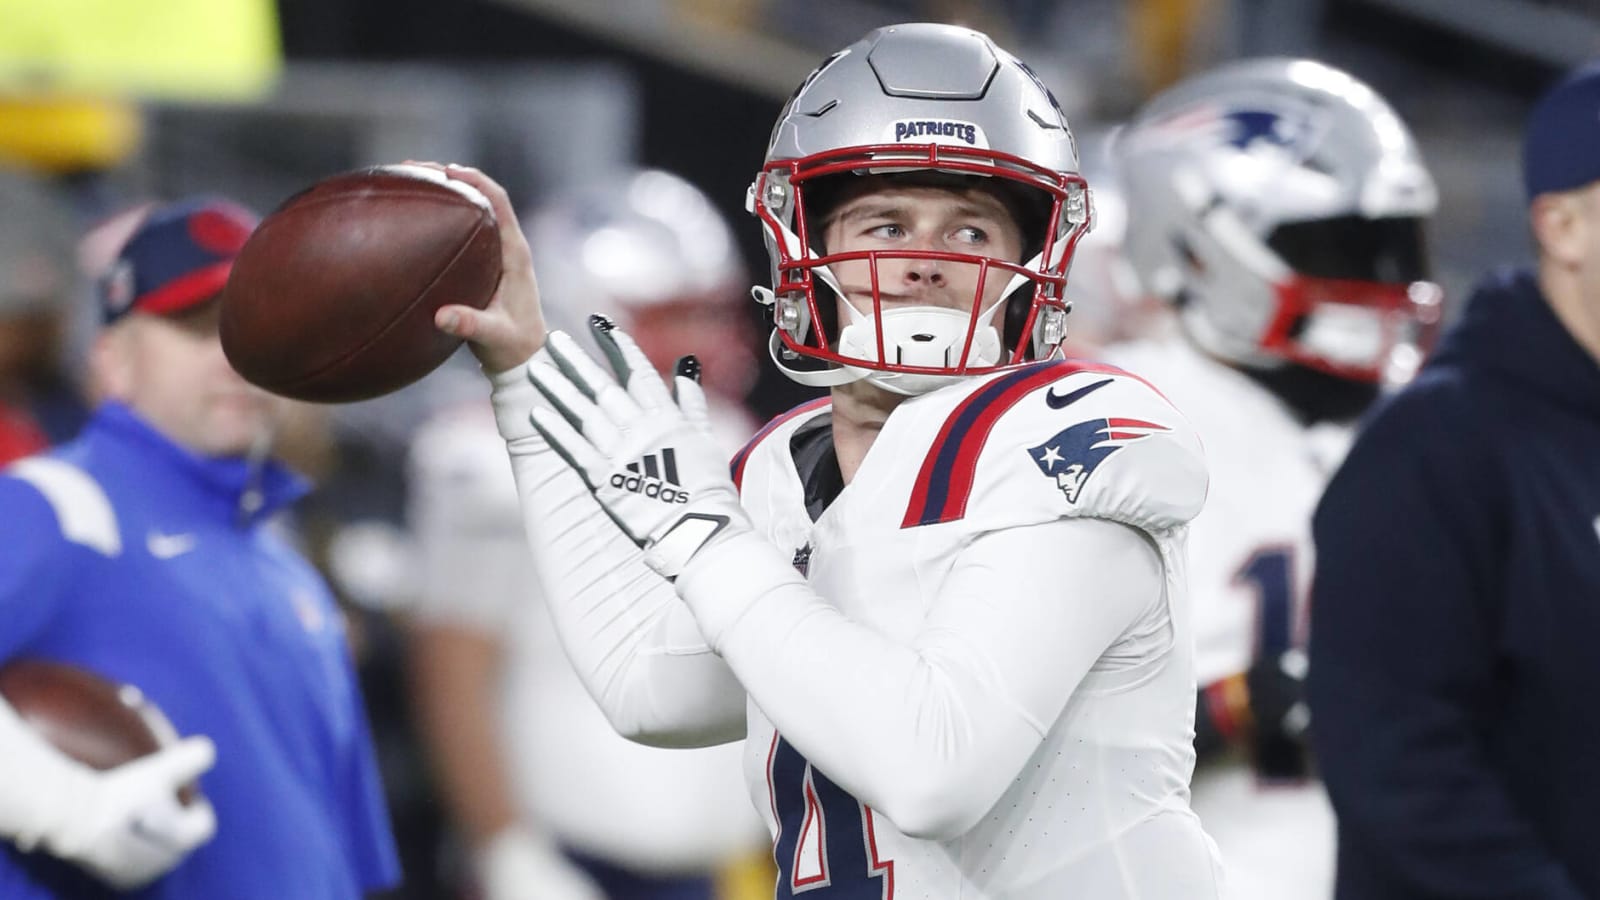 Bailey Zappe gave great reason for not having family at Patriots-Steelers game